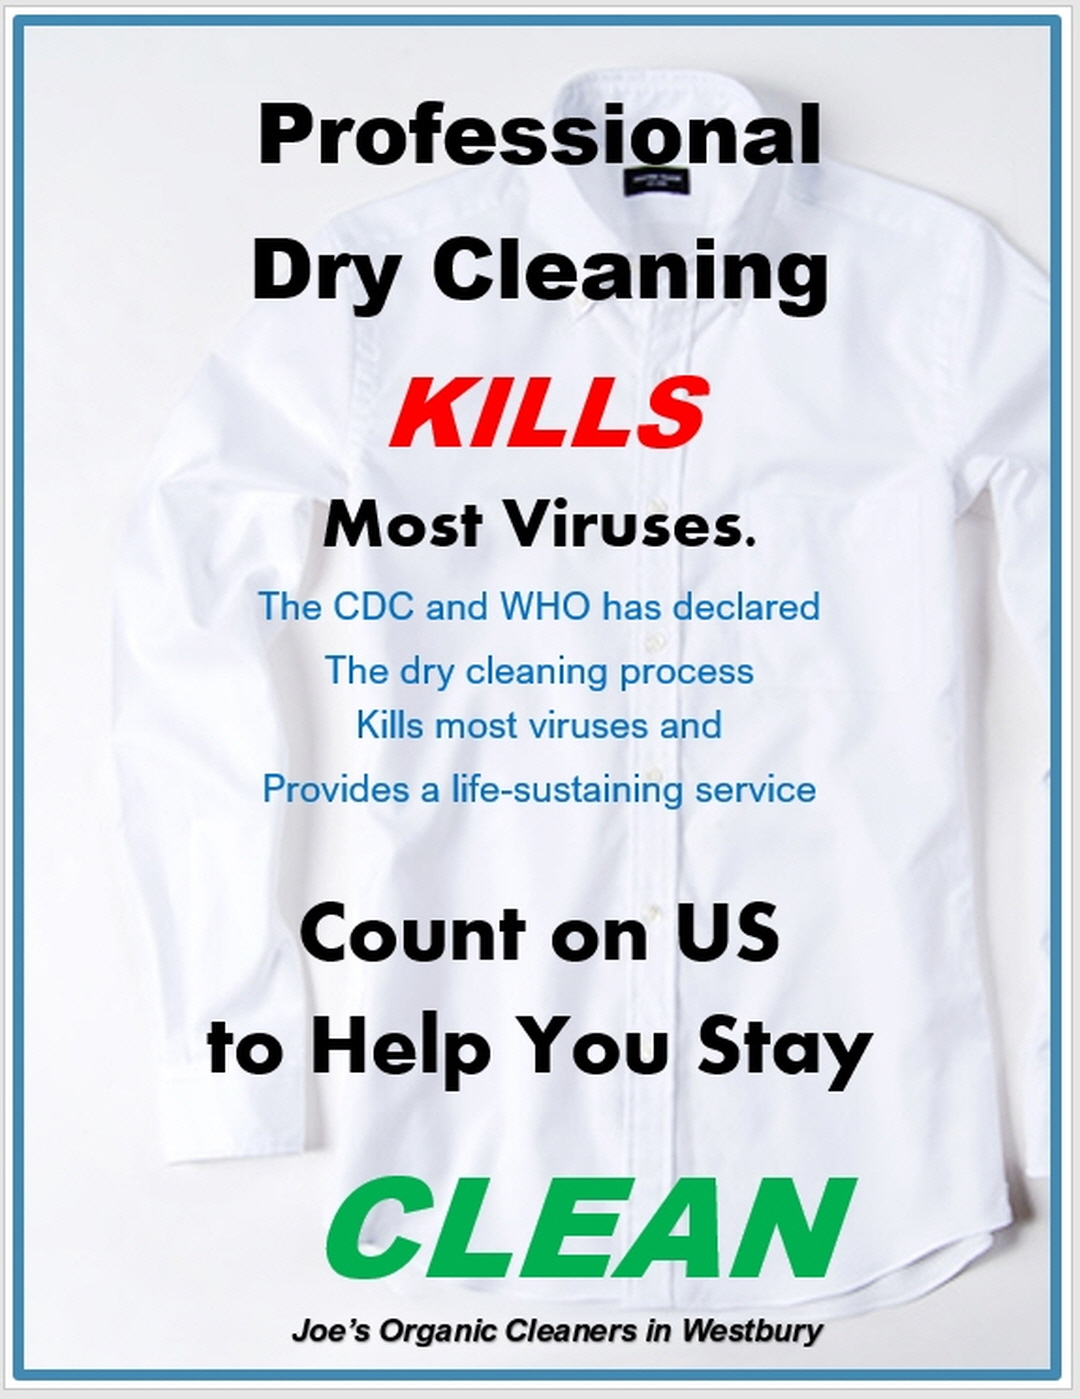 Professional Dry Cleaning KILLS Most Viruses